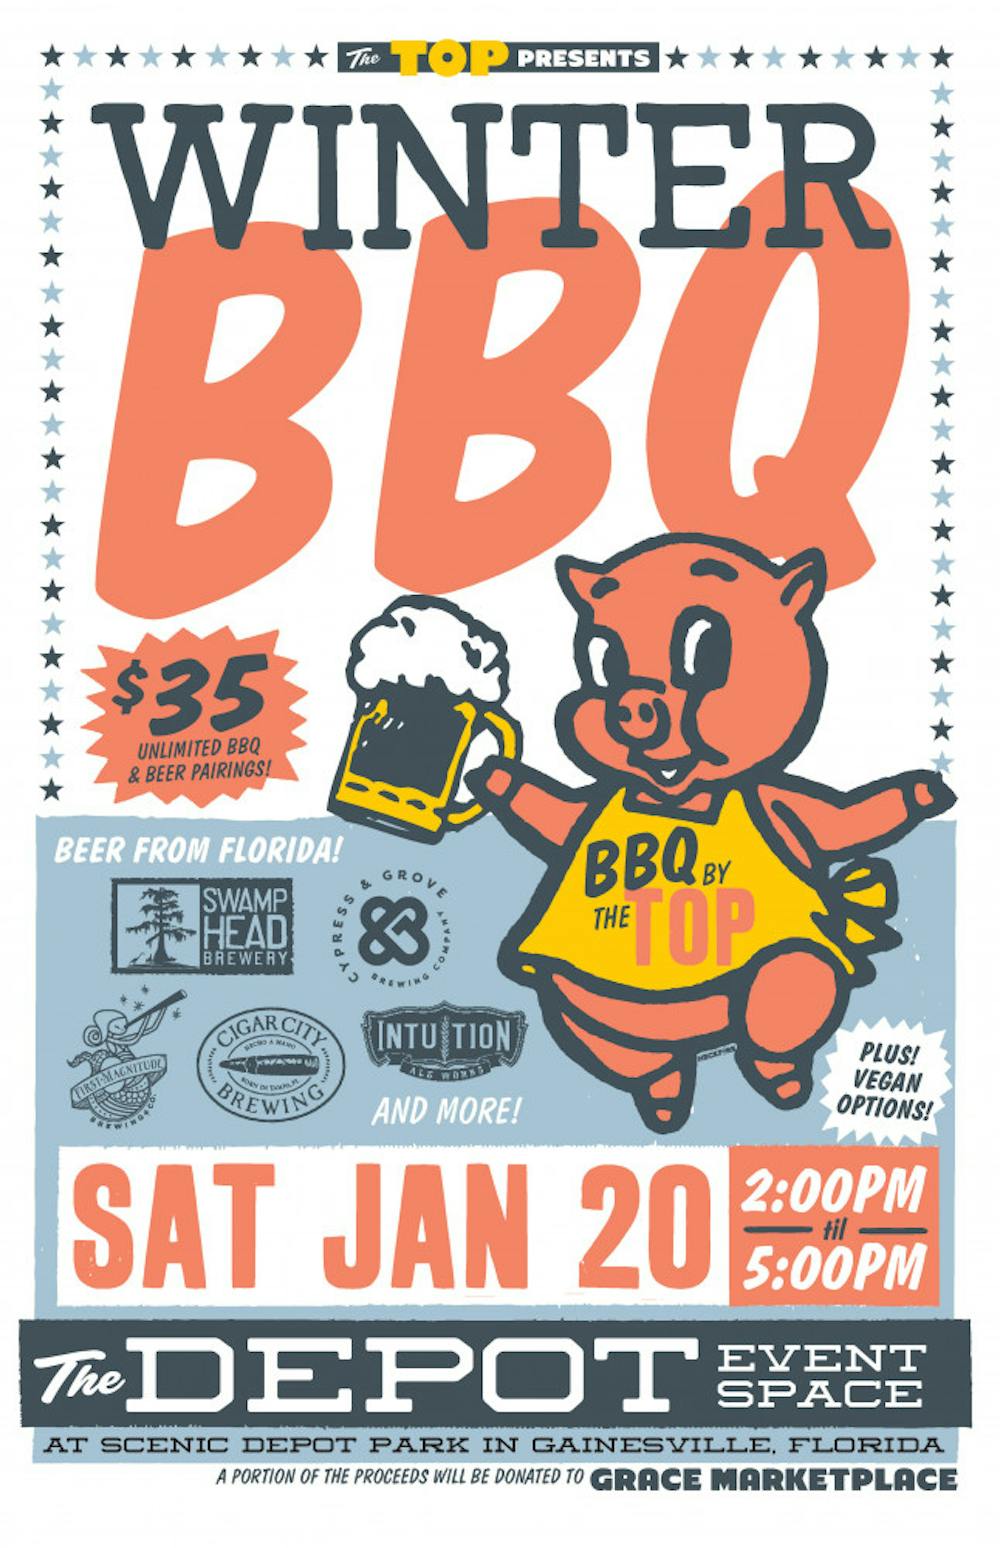 <p><span id="docs-internal-guid-3b6cfc06-01ea-8768-9166-30df1dfa7a35"><span>The Top is hosting a winter barbecue at 201 SE Depot Ave. on Saturday, Jan. 20 from 2 p.m. to 5 p.m. to benefit GRACE Marketplace, a local homeless shelter.</span></span></p>